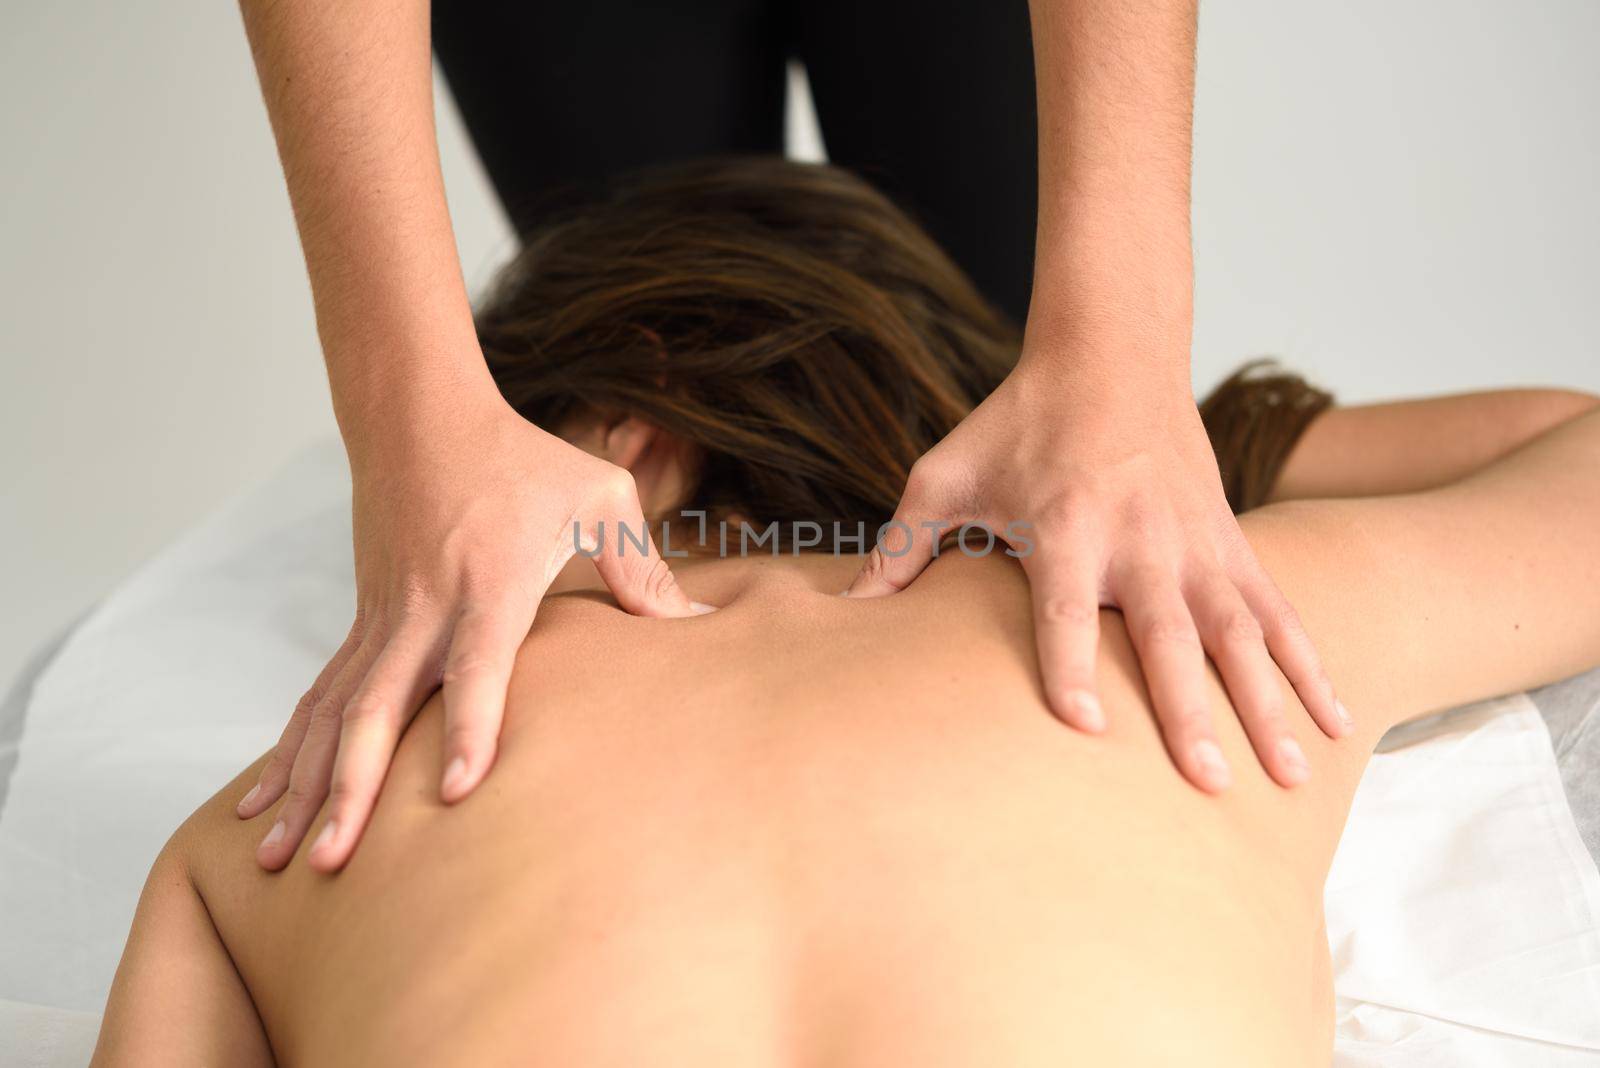 Young woman receiving a back massage in a spa center. by javiindy